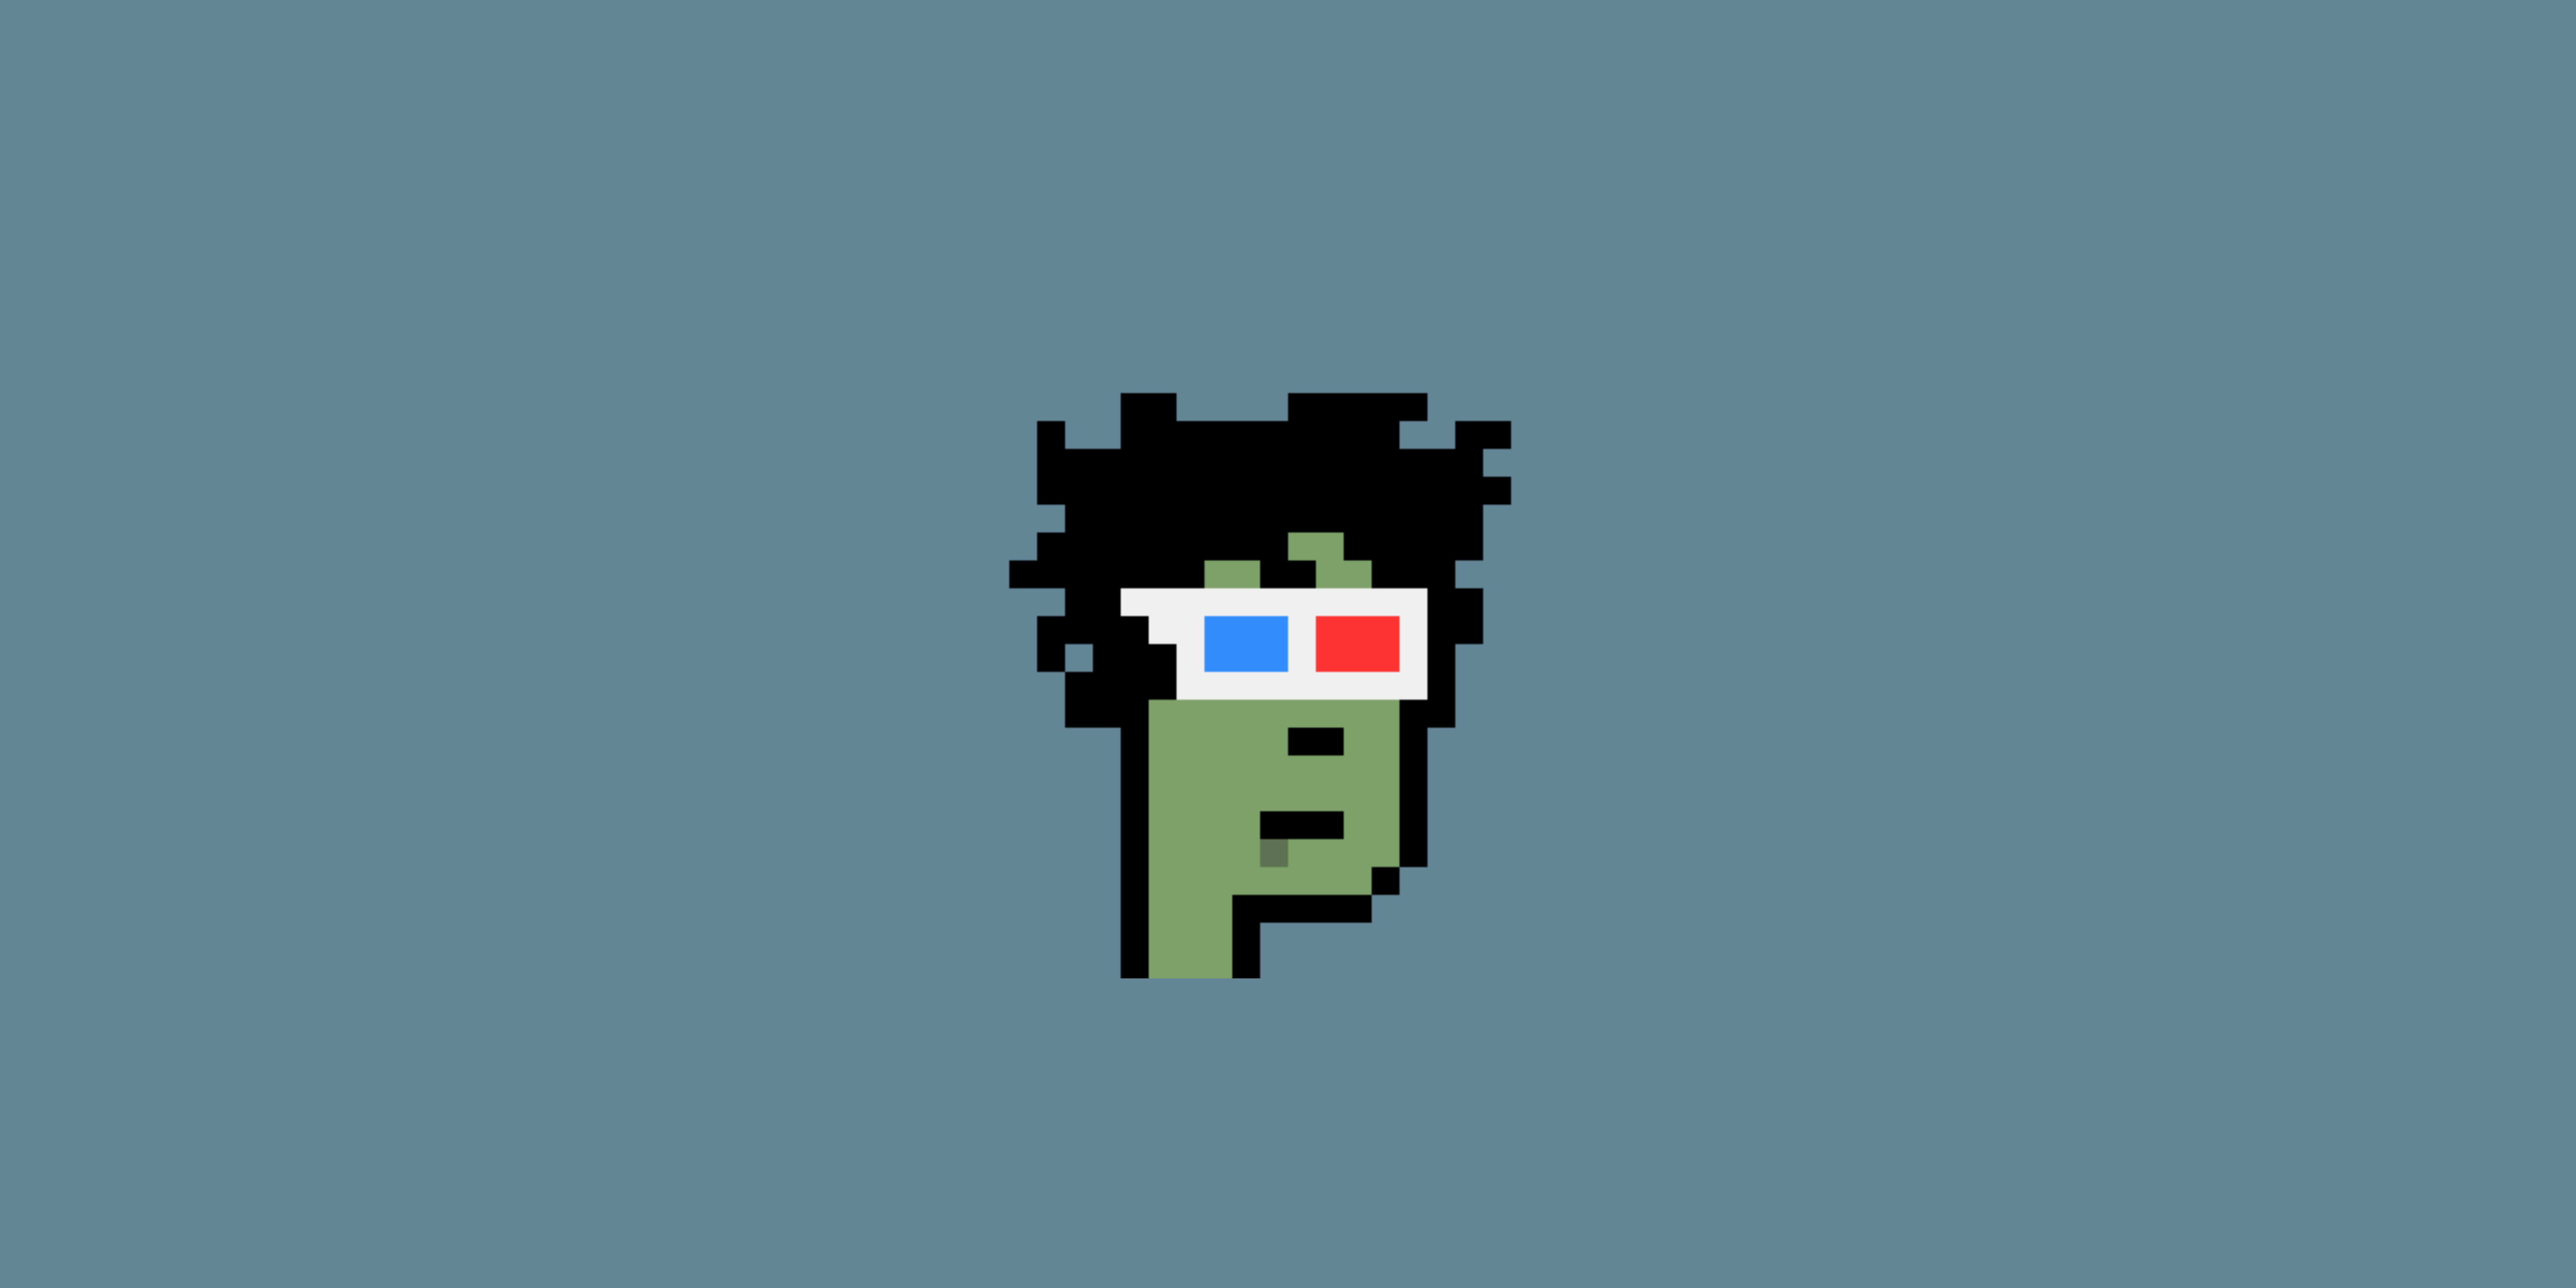 A Zombie CryptoPunk with black wild hair and 3D glasses